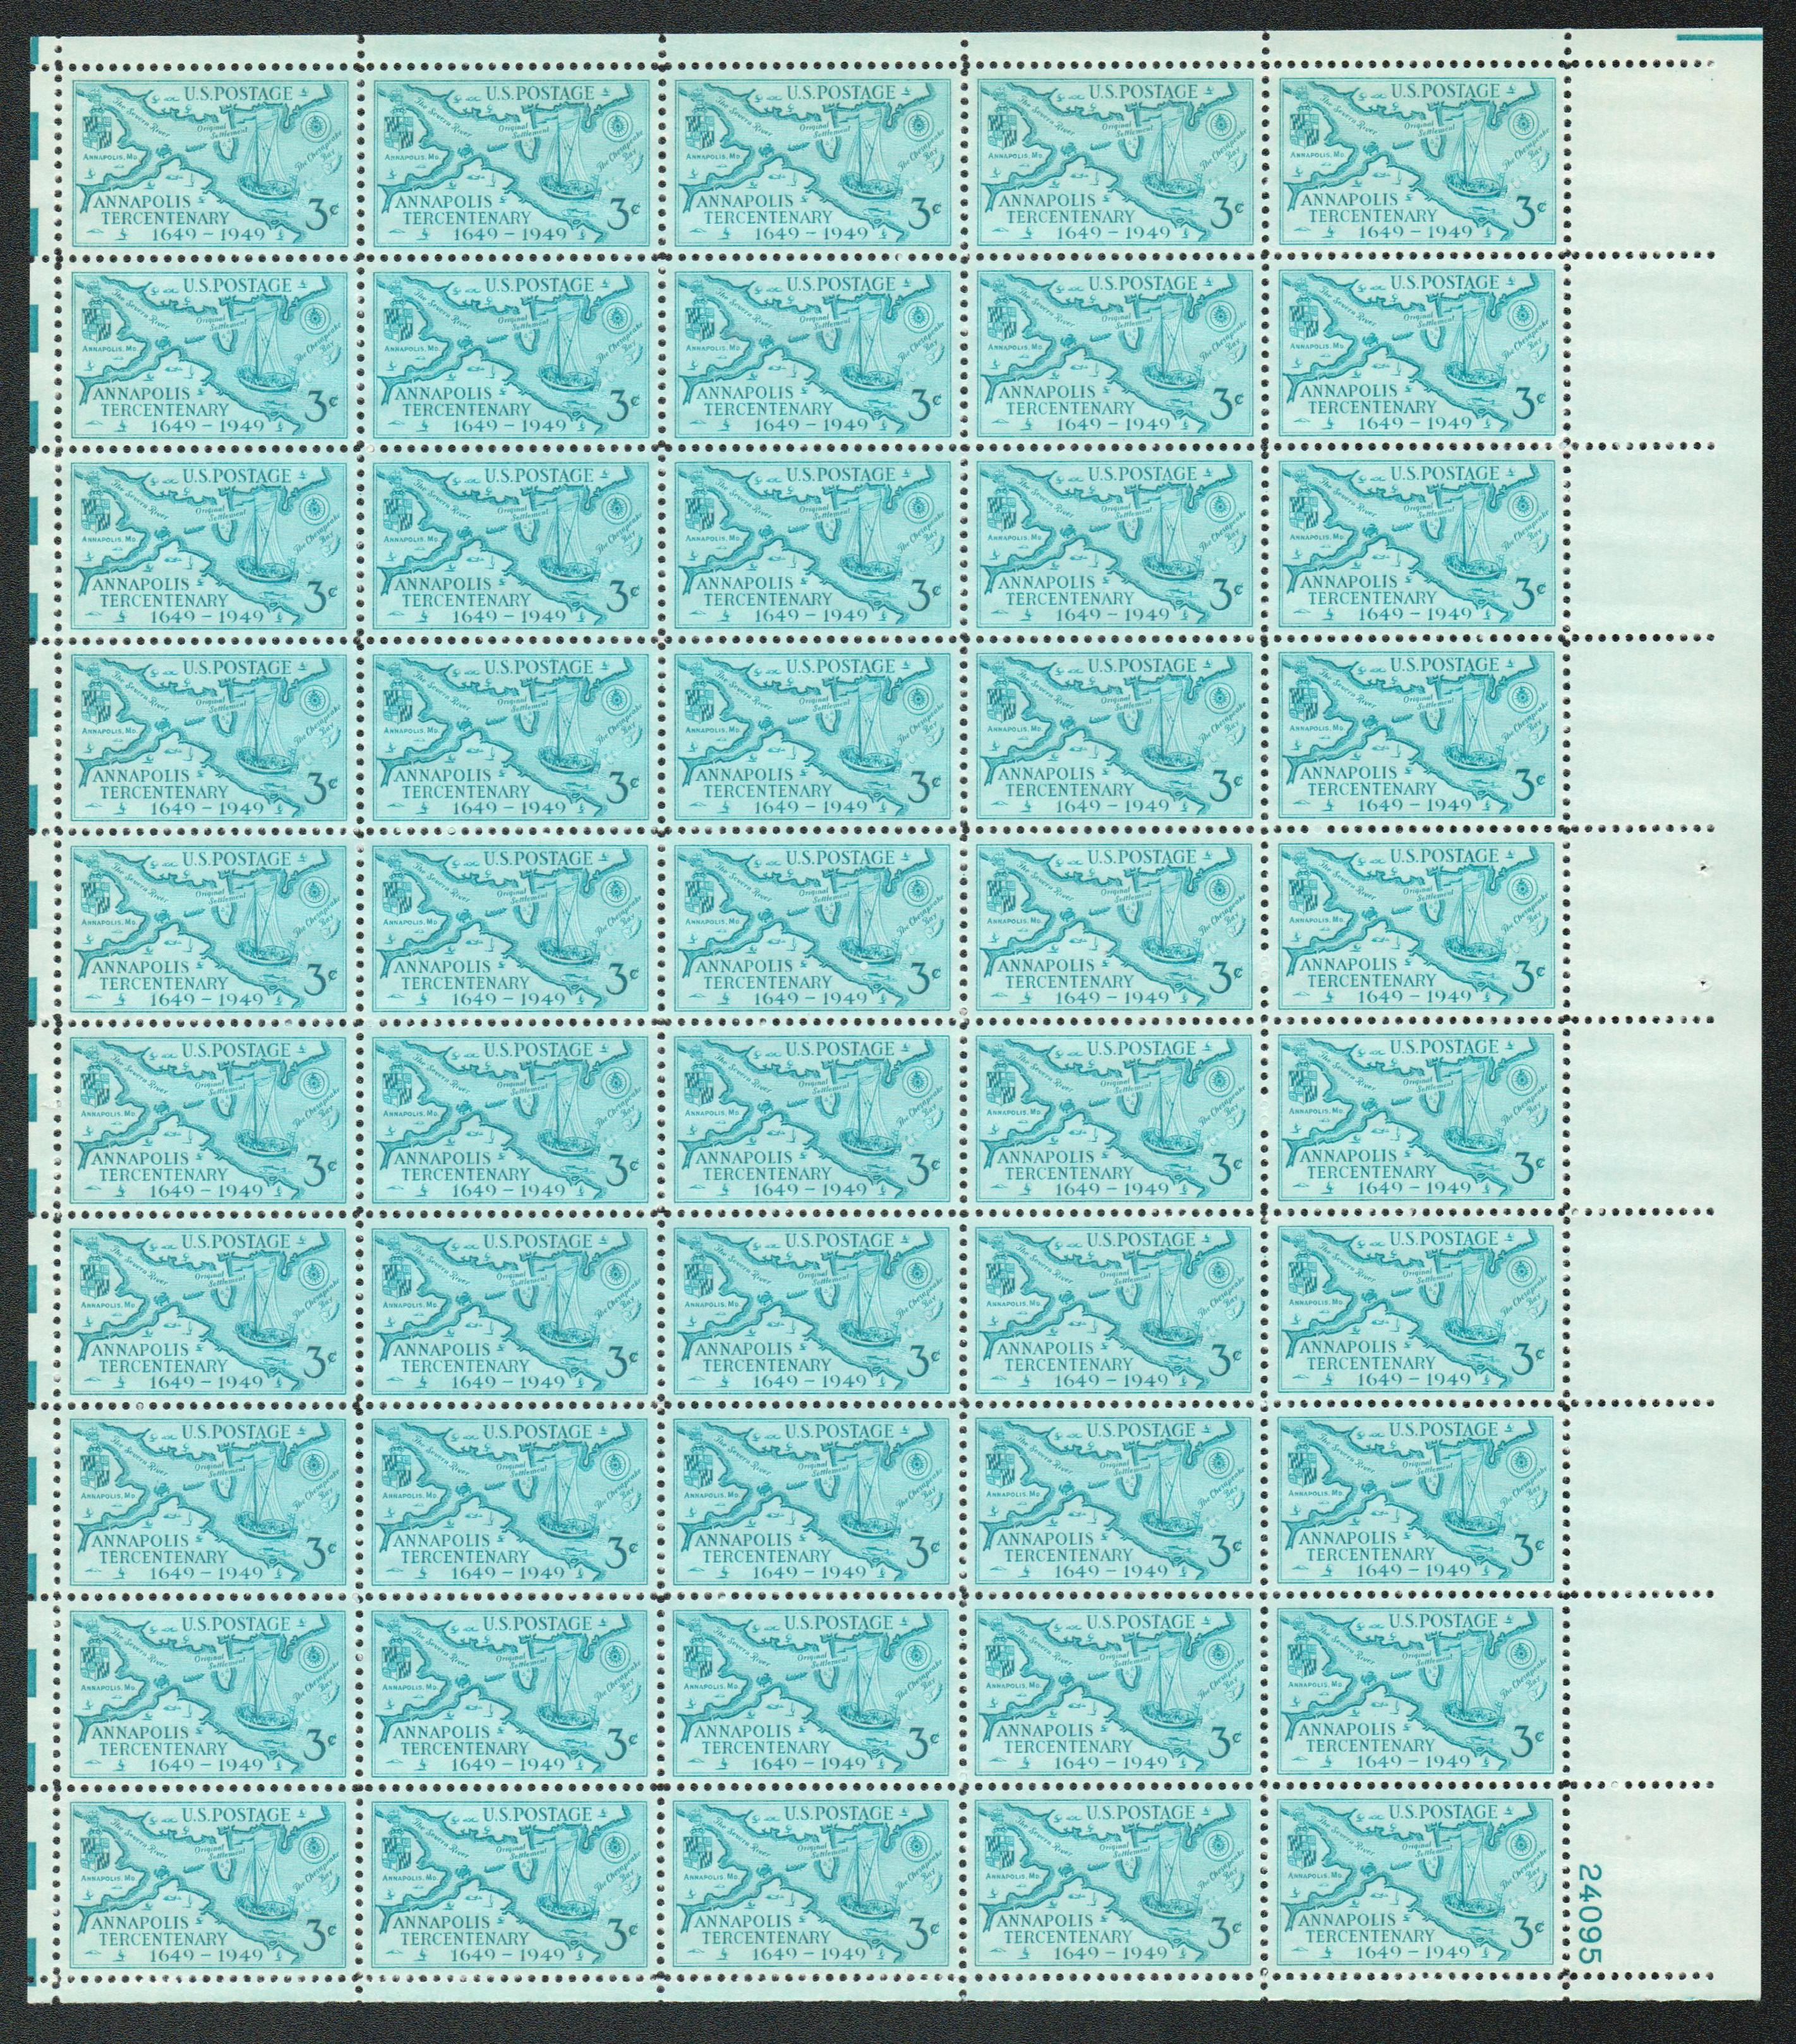 Annapolis Tercentenary 3c Unused Vintage 1949 Postage Stamps for Mailing -  Collecting - Crafts. Scott Catalog 984